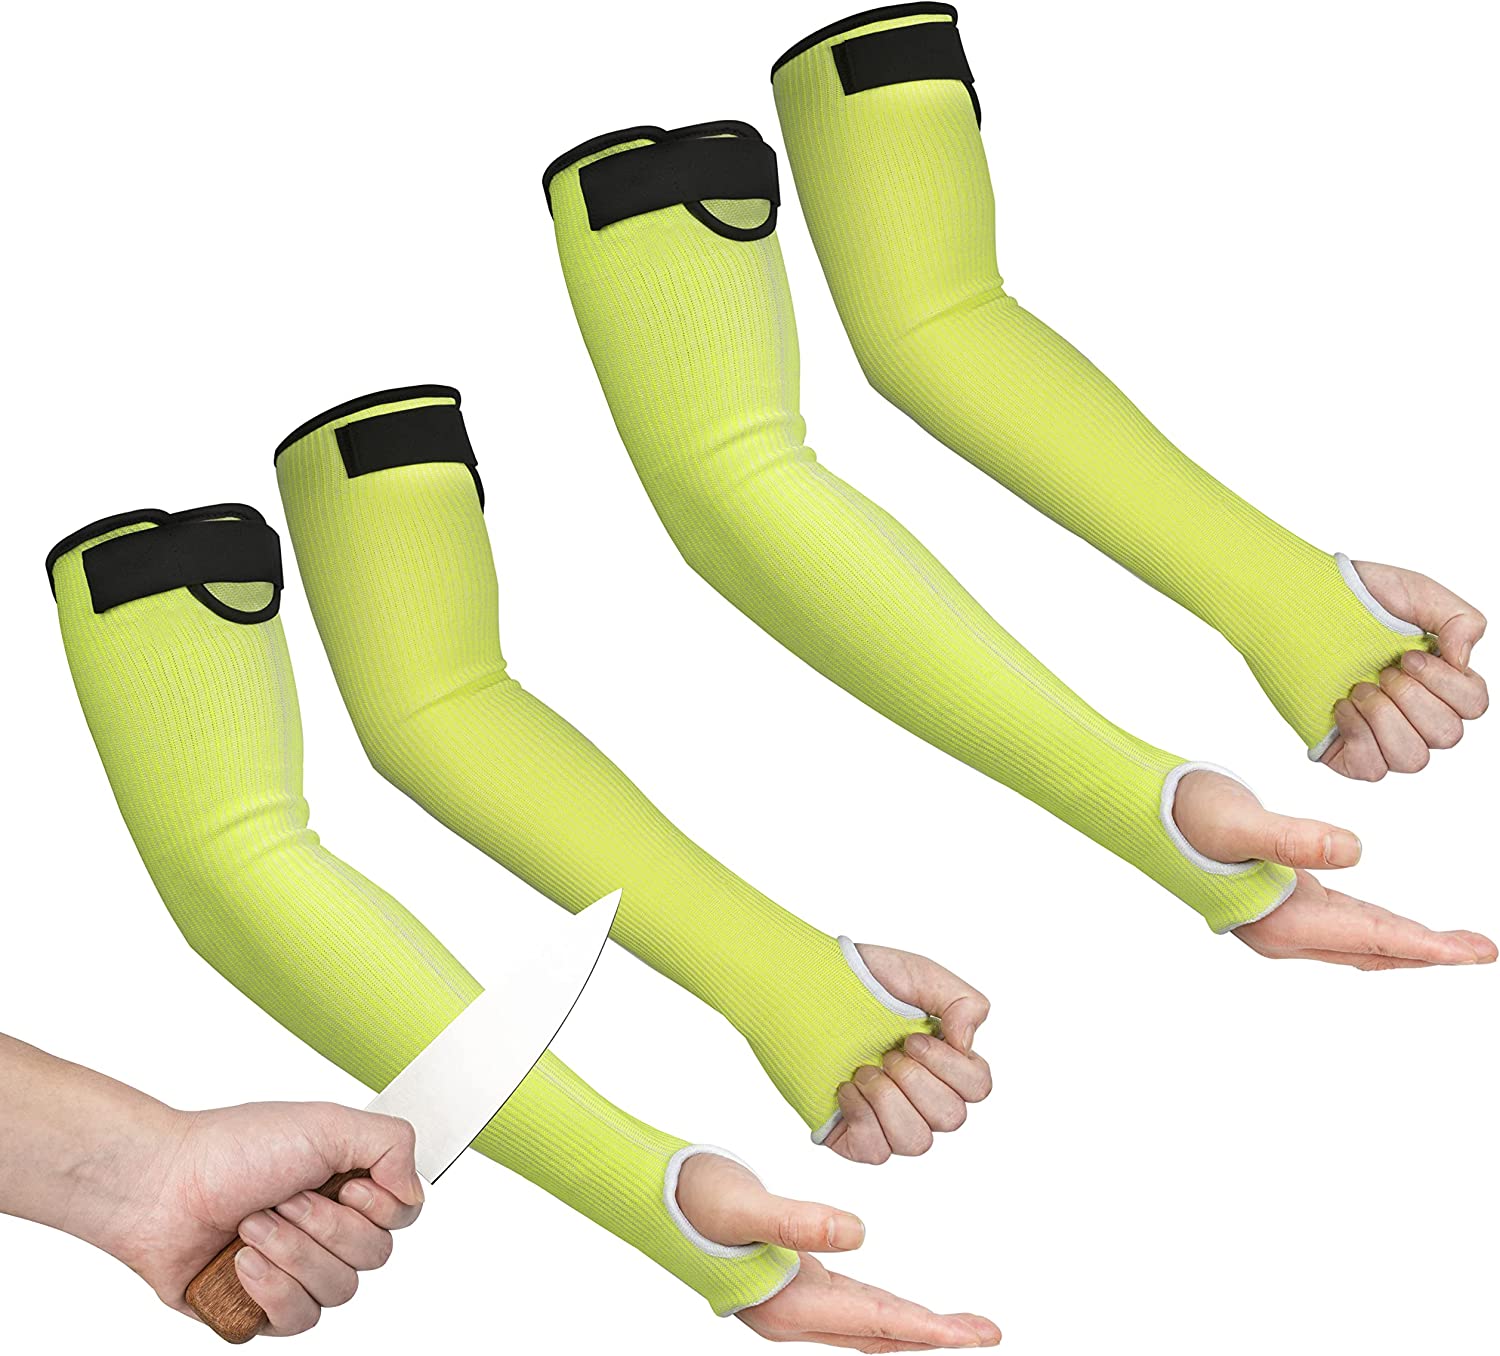 toolant Kevlar-Arm Sleeves, Cut Resistant for Bruising and UV Protection